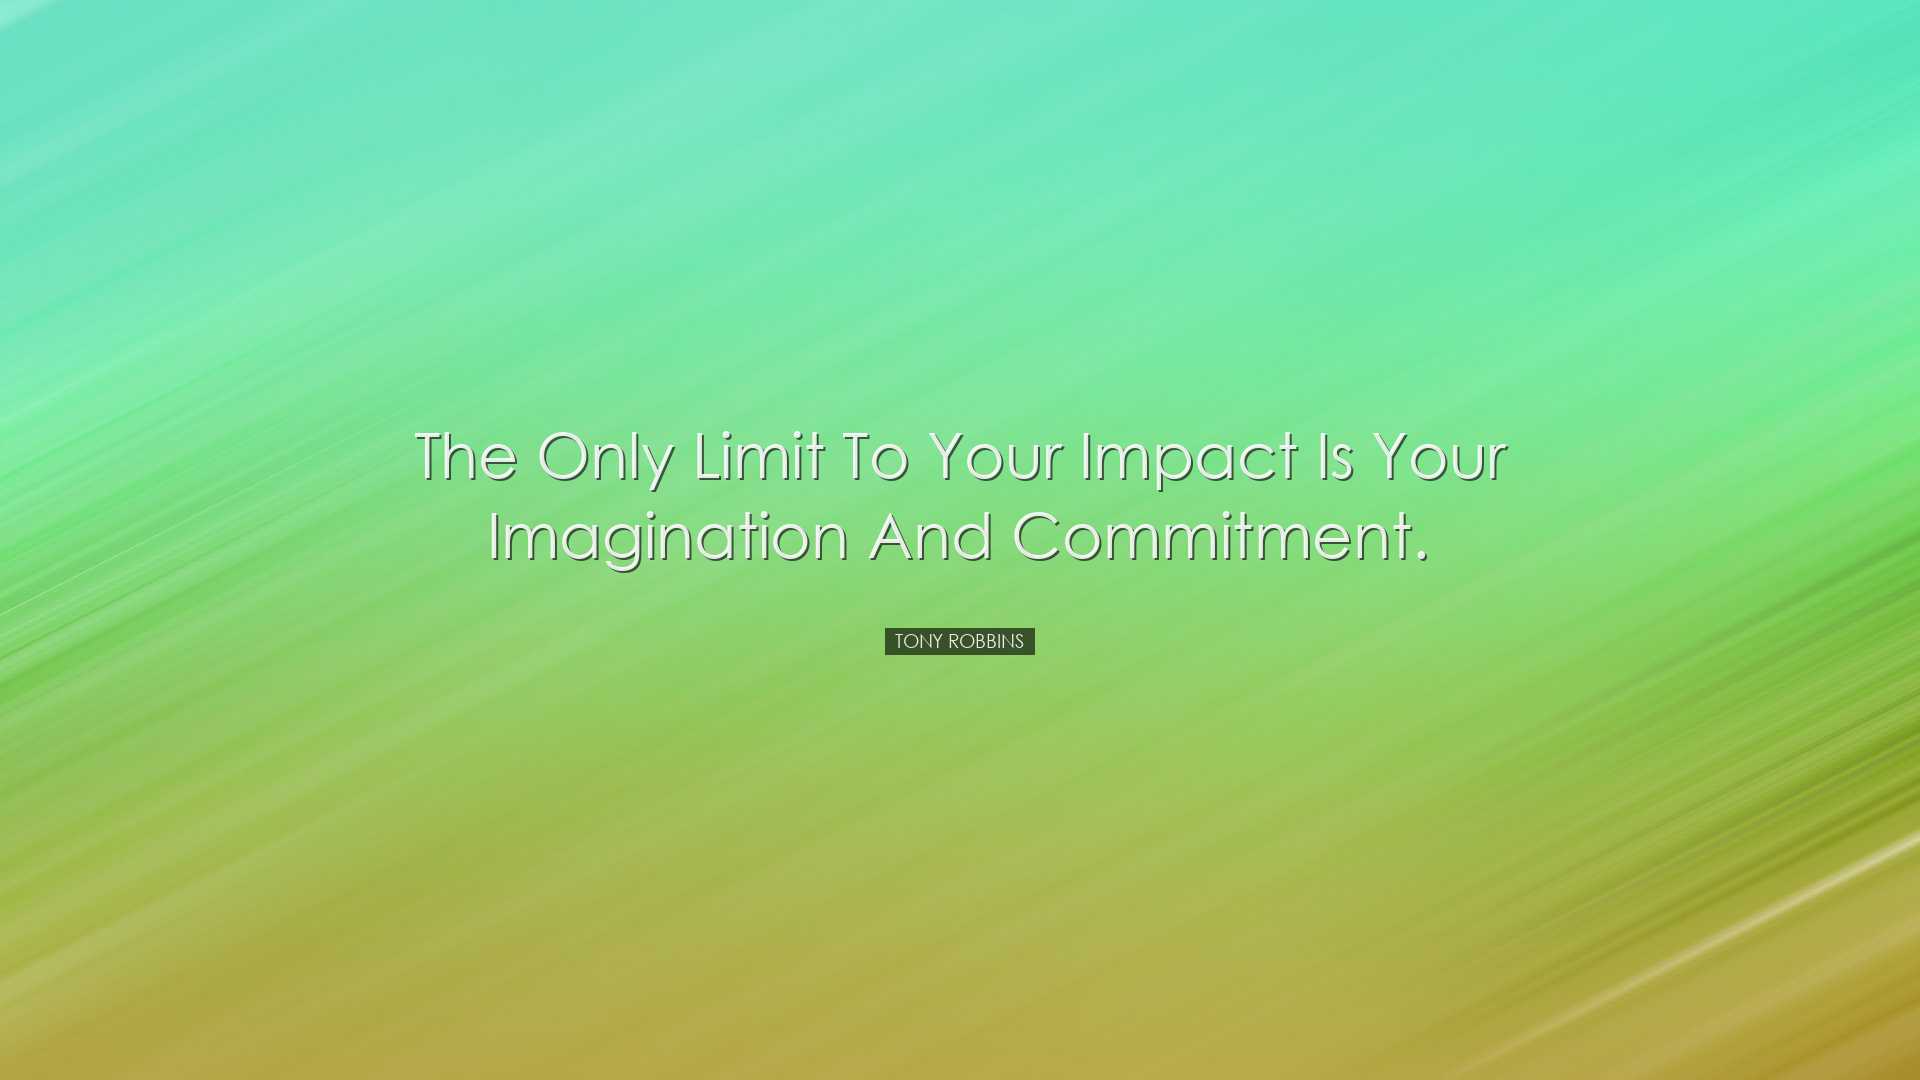 The only limit to your impact is your imagination and commitment.